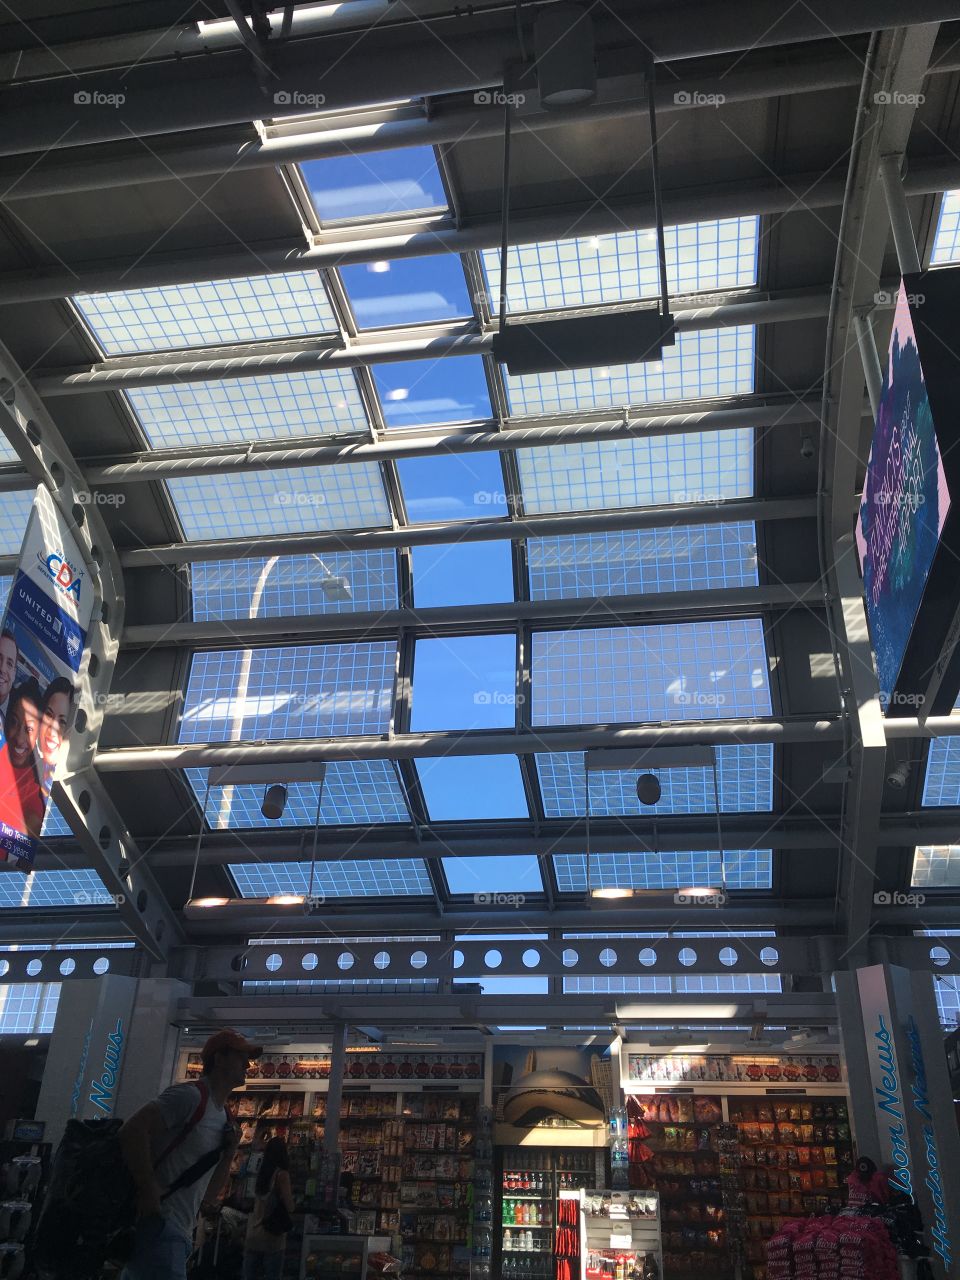 A shot of O'Hare airport ceiling while on a layover.